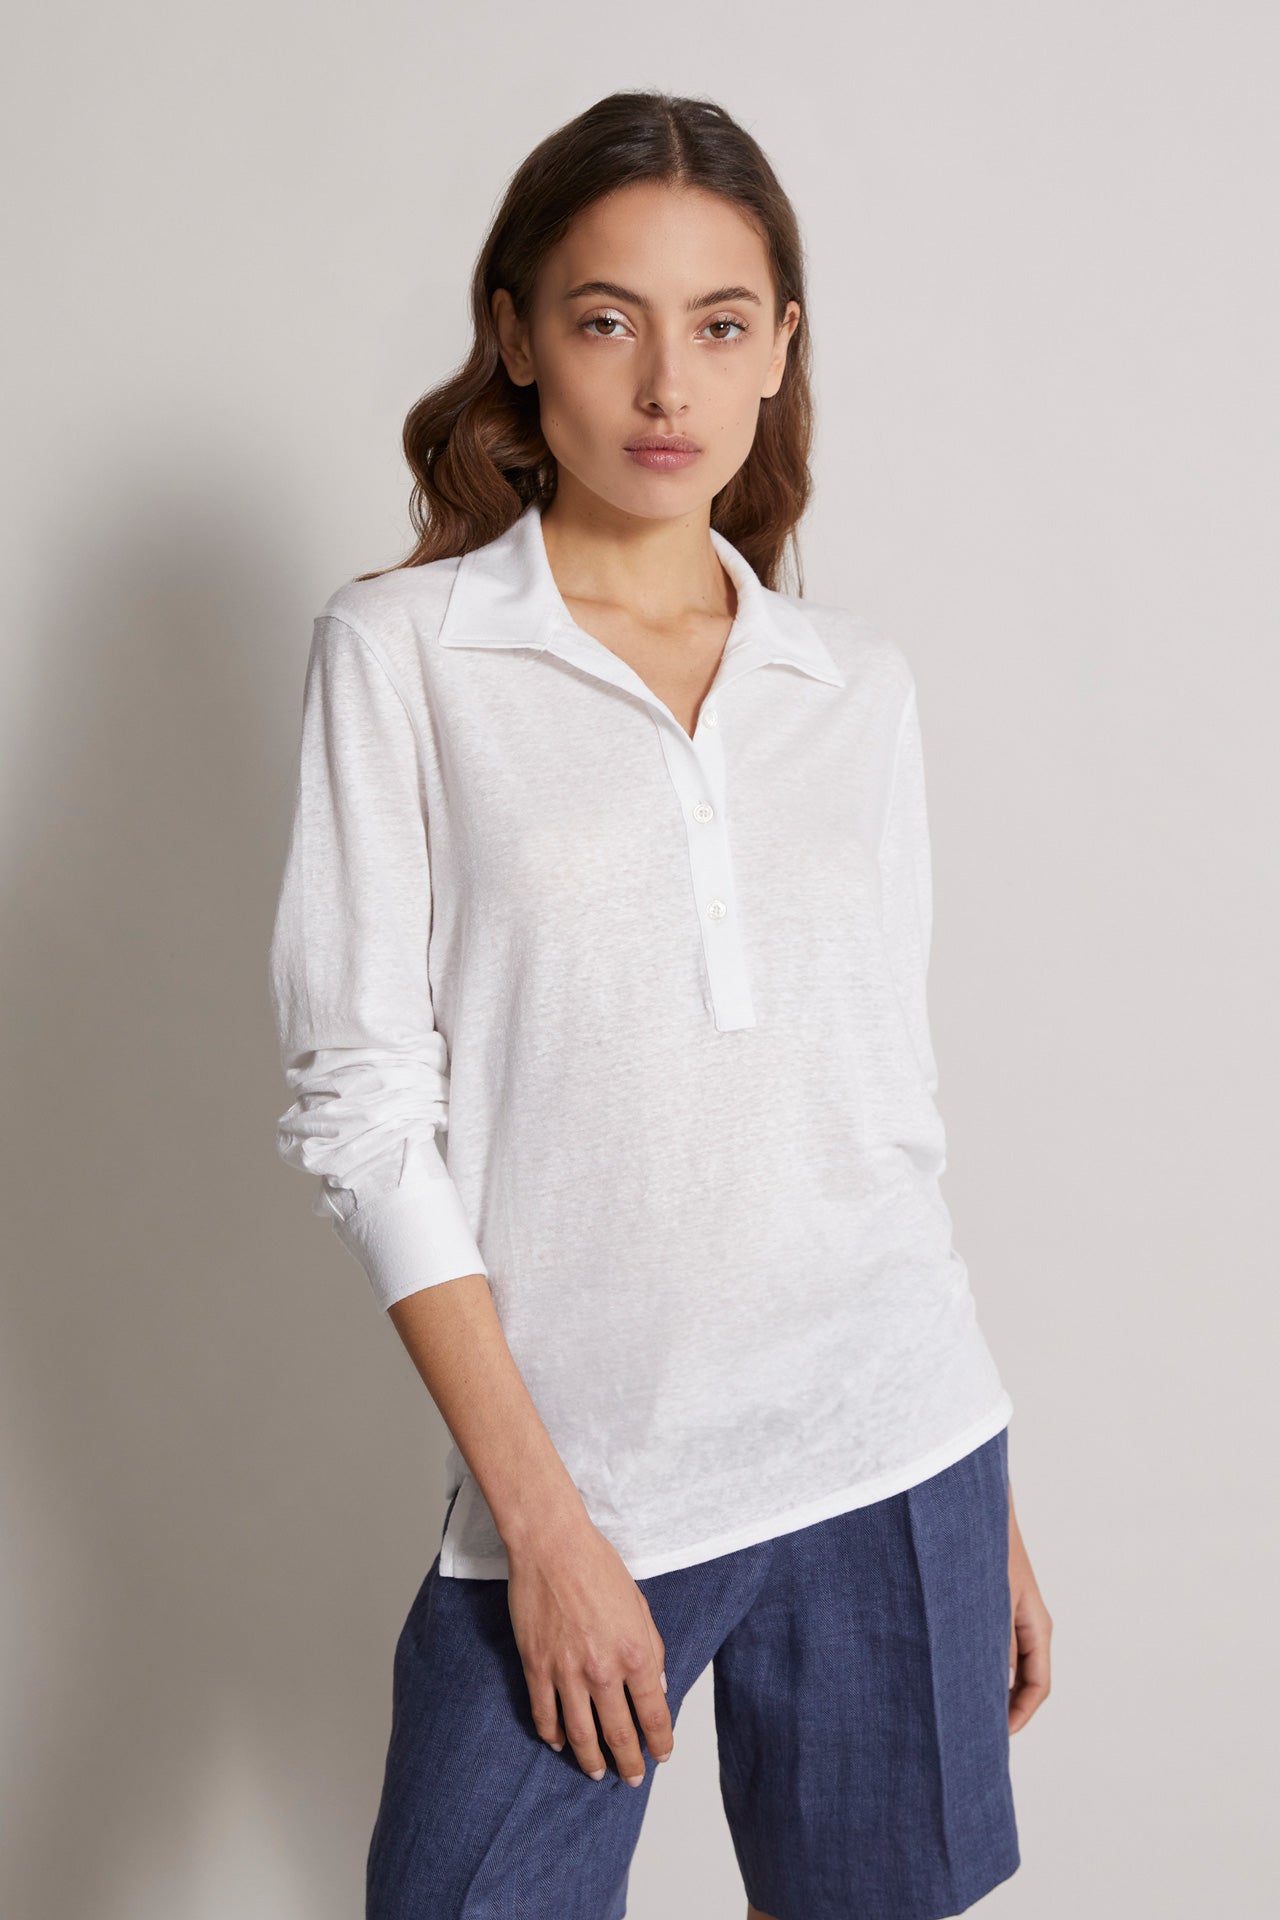 Soft and elegant linen polo shirt in white